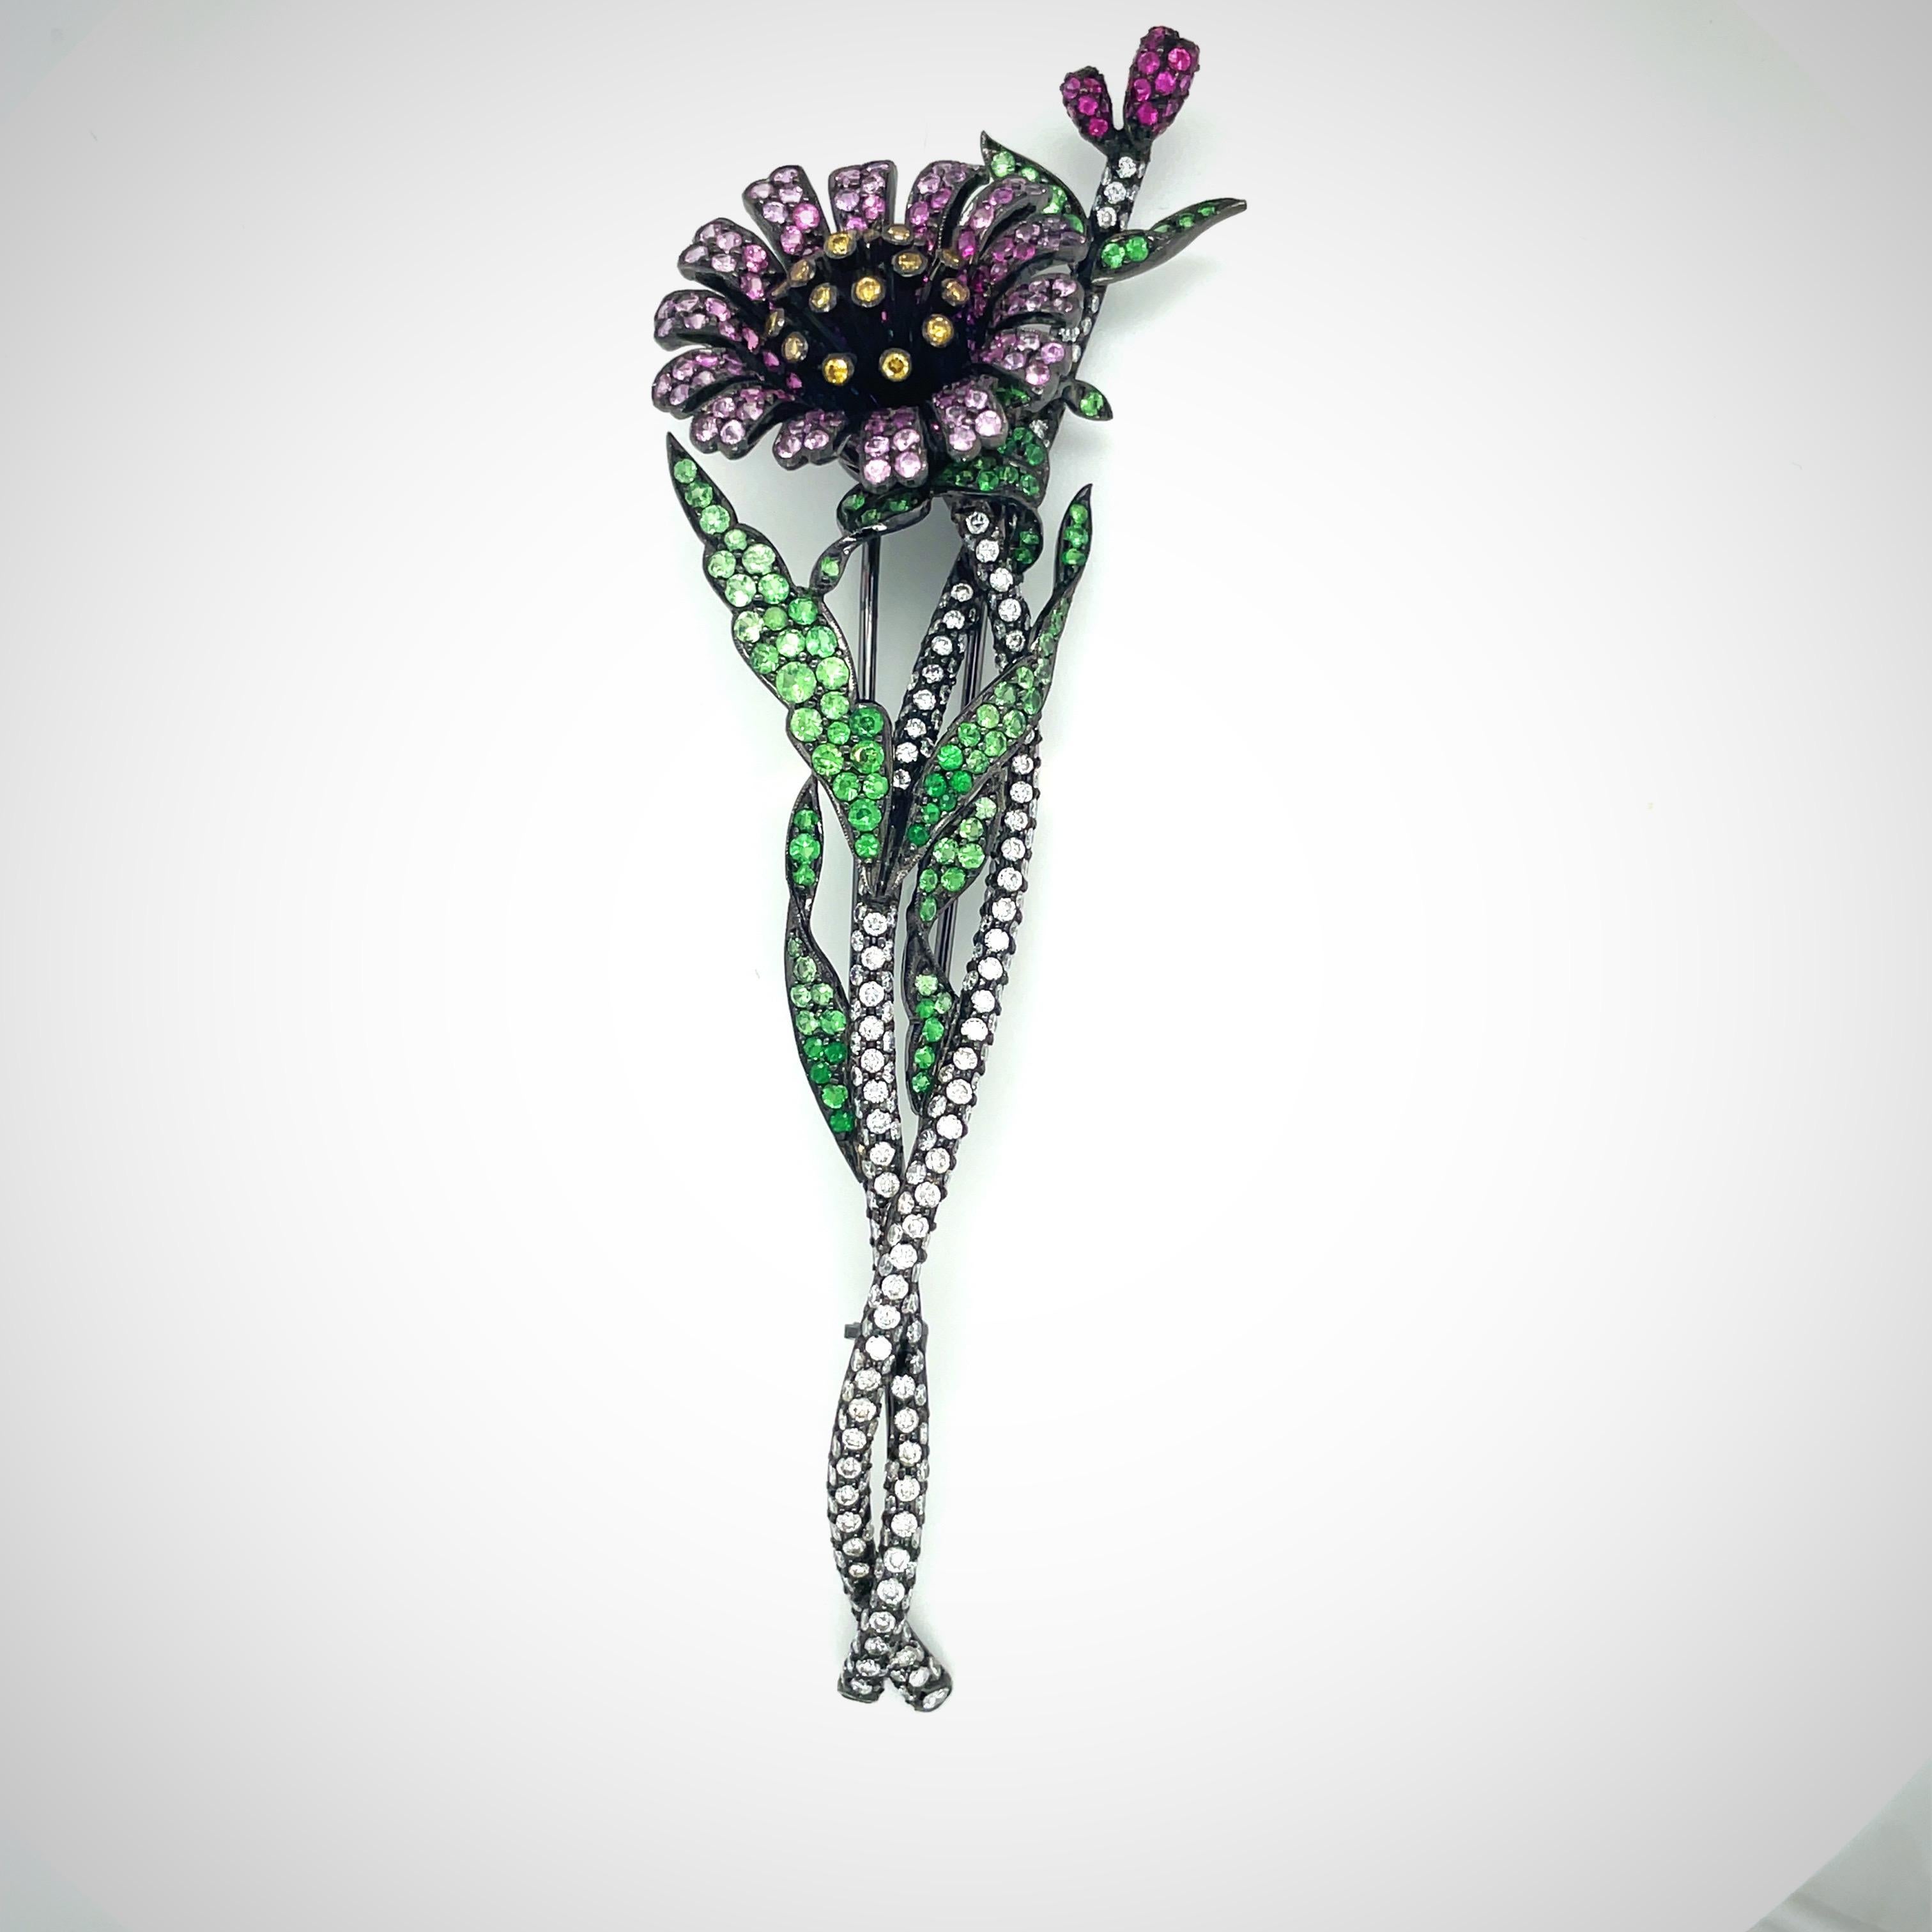 Blackened 18kt Gold Flower Brooch with Diamonds, Pink Sapphires and Tsavorite In New Condition For Sale In New York, NY